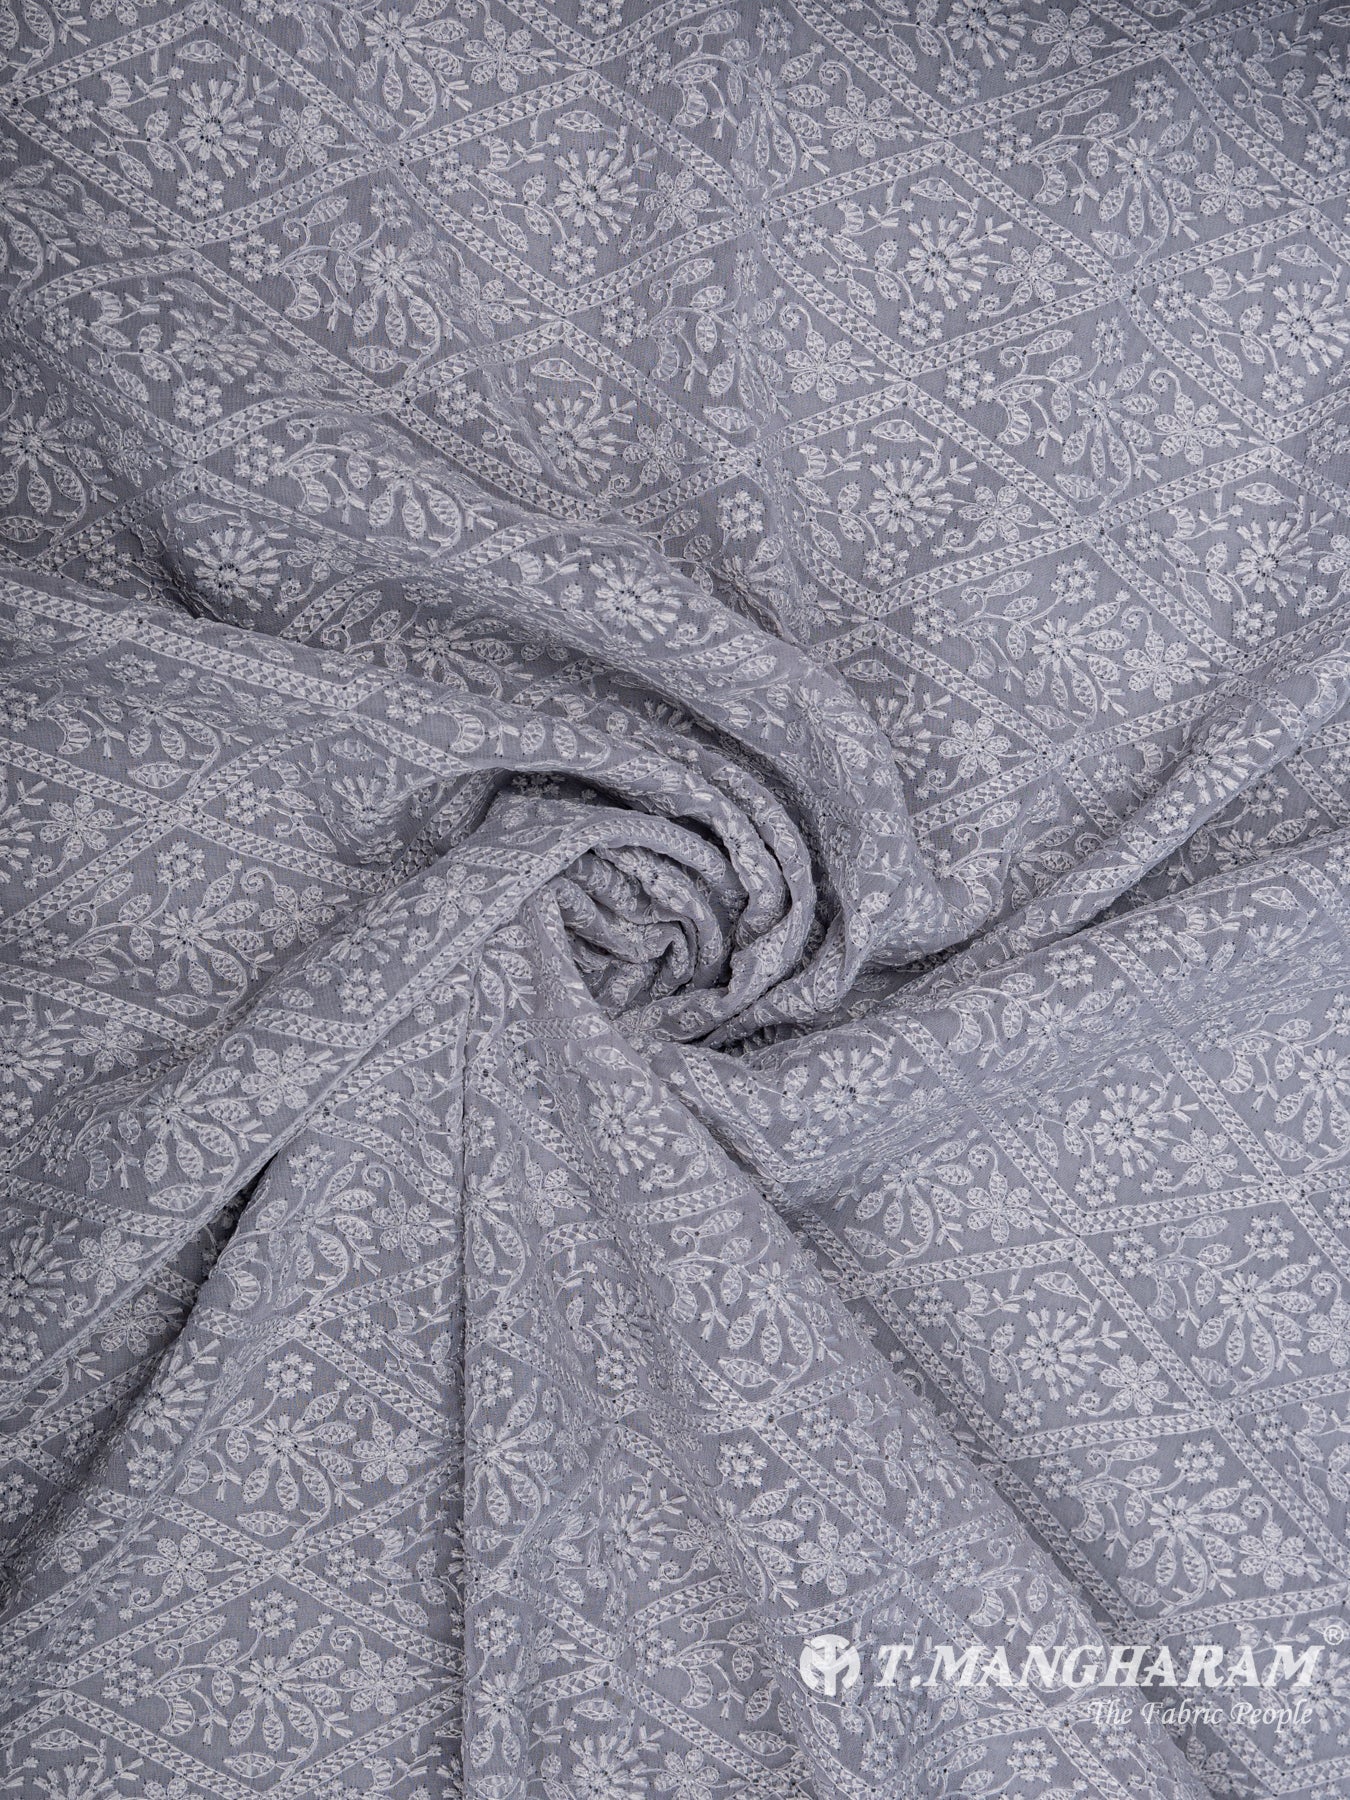 Grey Georgette Embroidery Fabric - EC6535 view-1